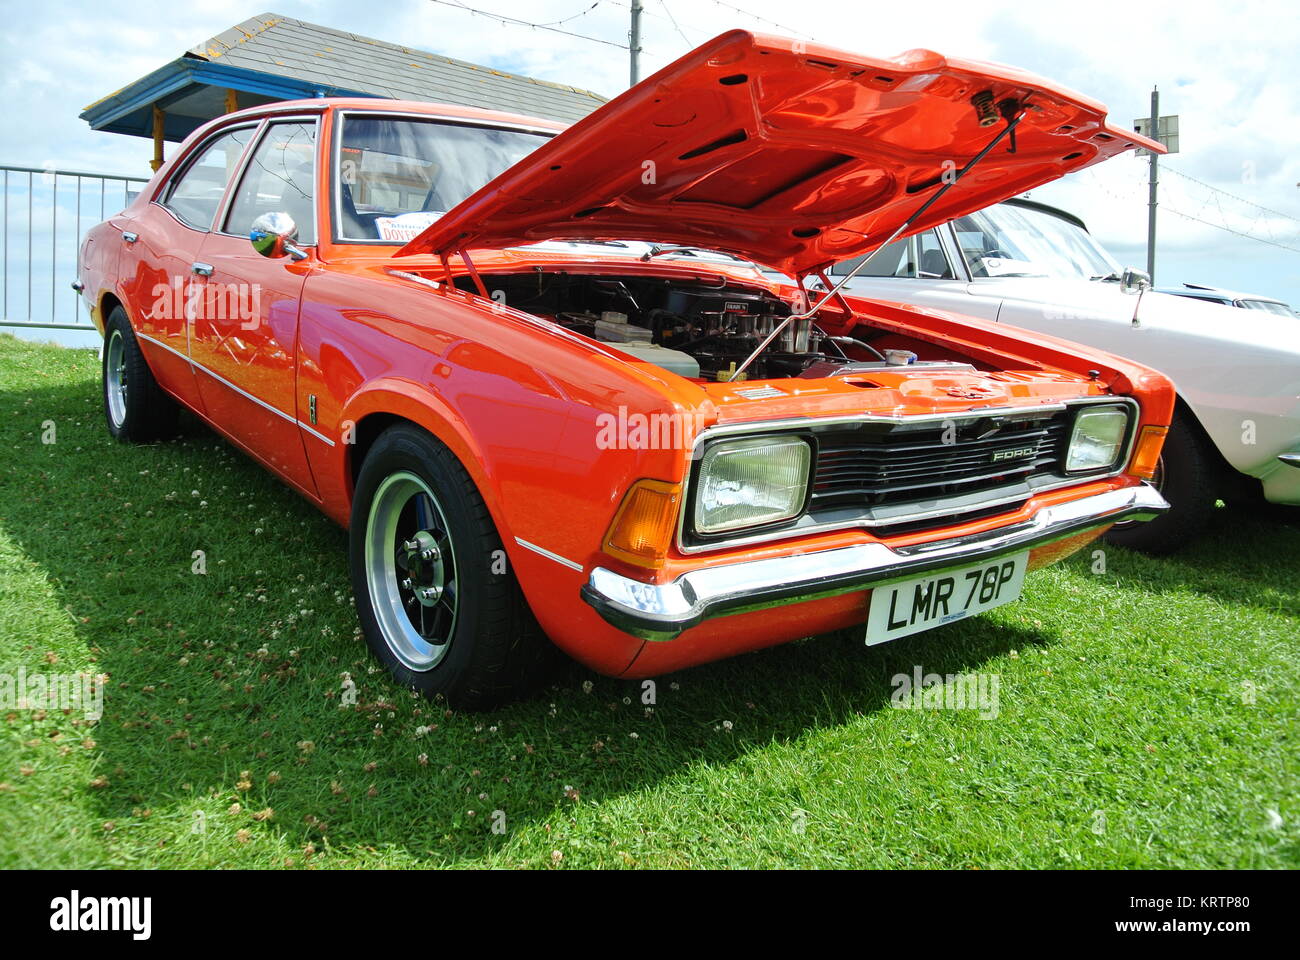 Ford Cortina MK3 classic car parked up on display Stock Photo - Alamy